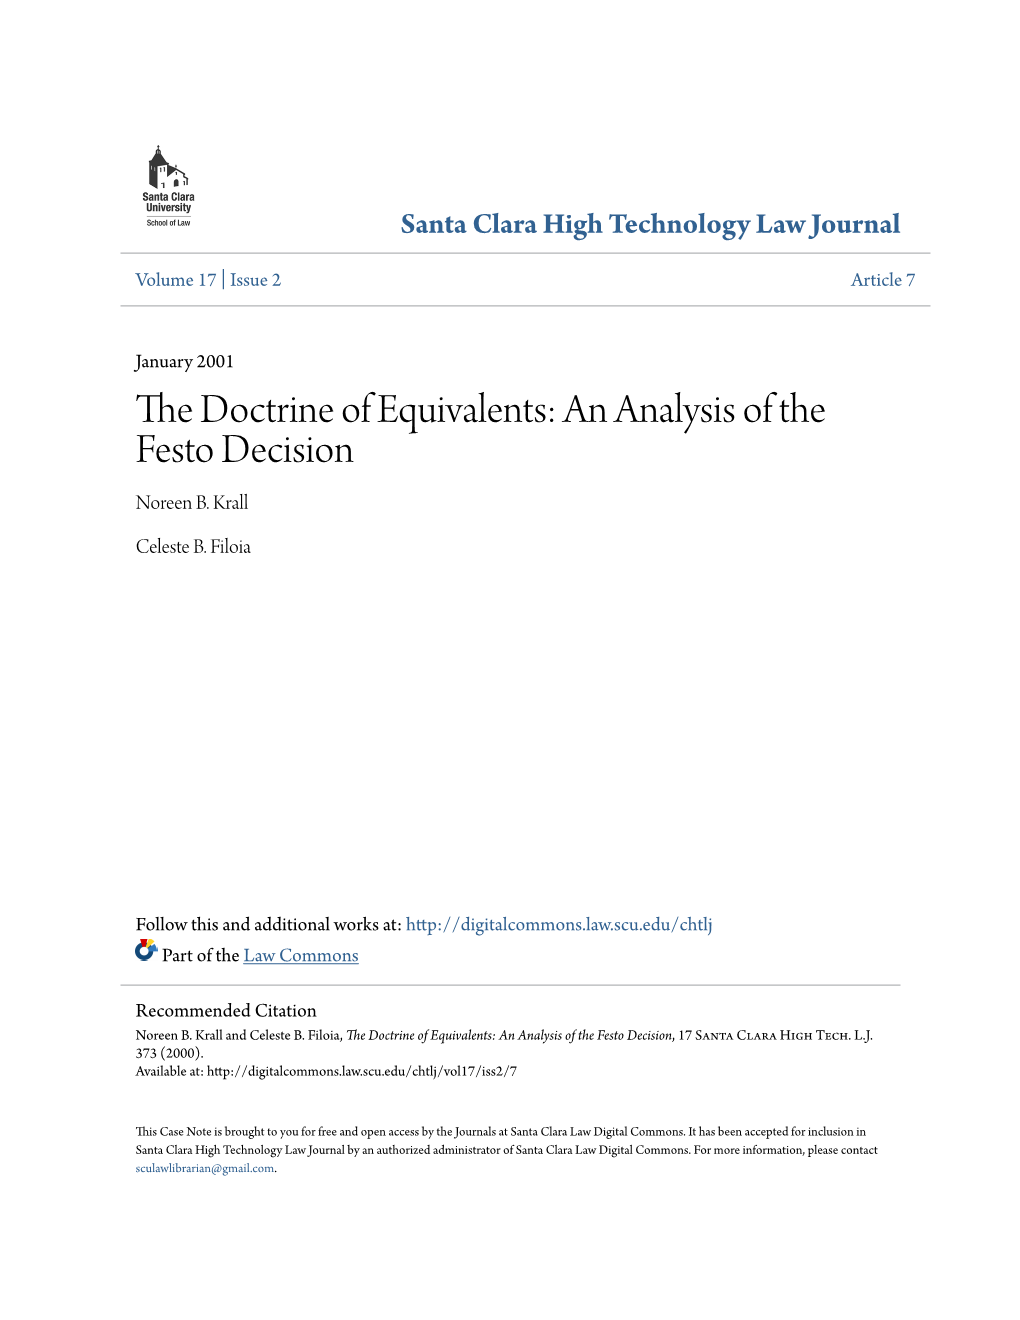 The Doctrine of Equivalents: an Analysis of the Festo Decision, 17 Santa Clara High Tech